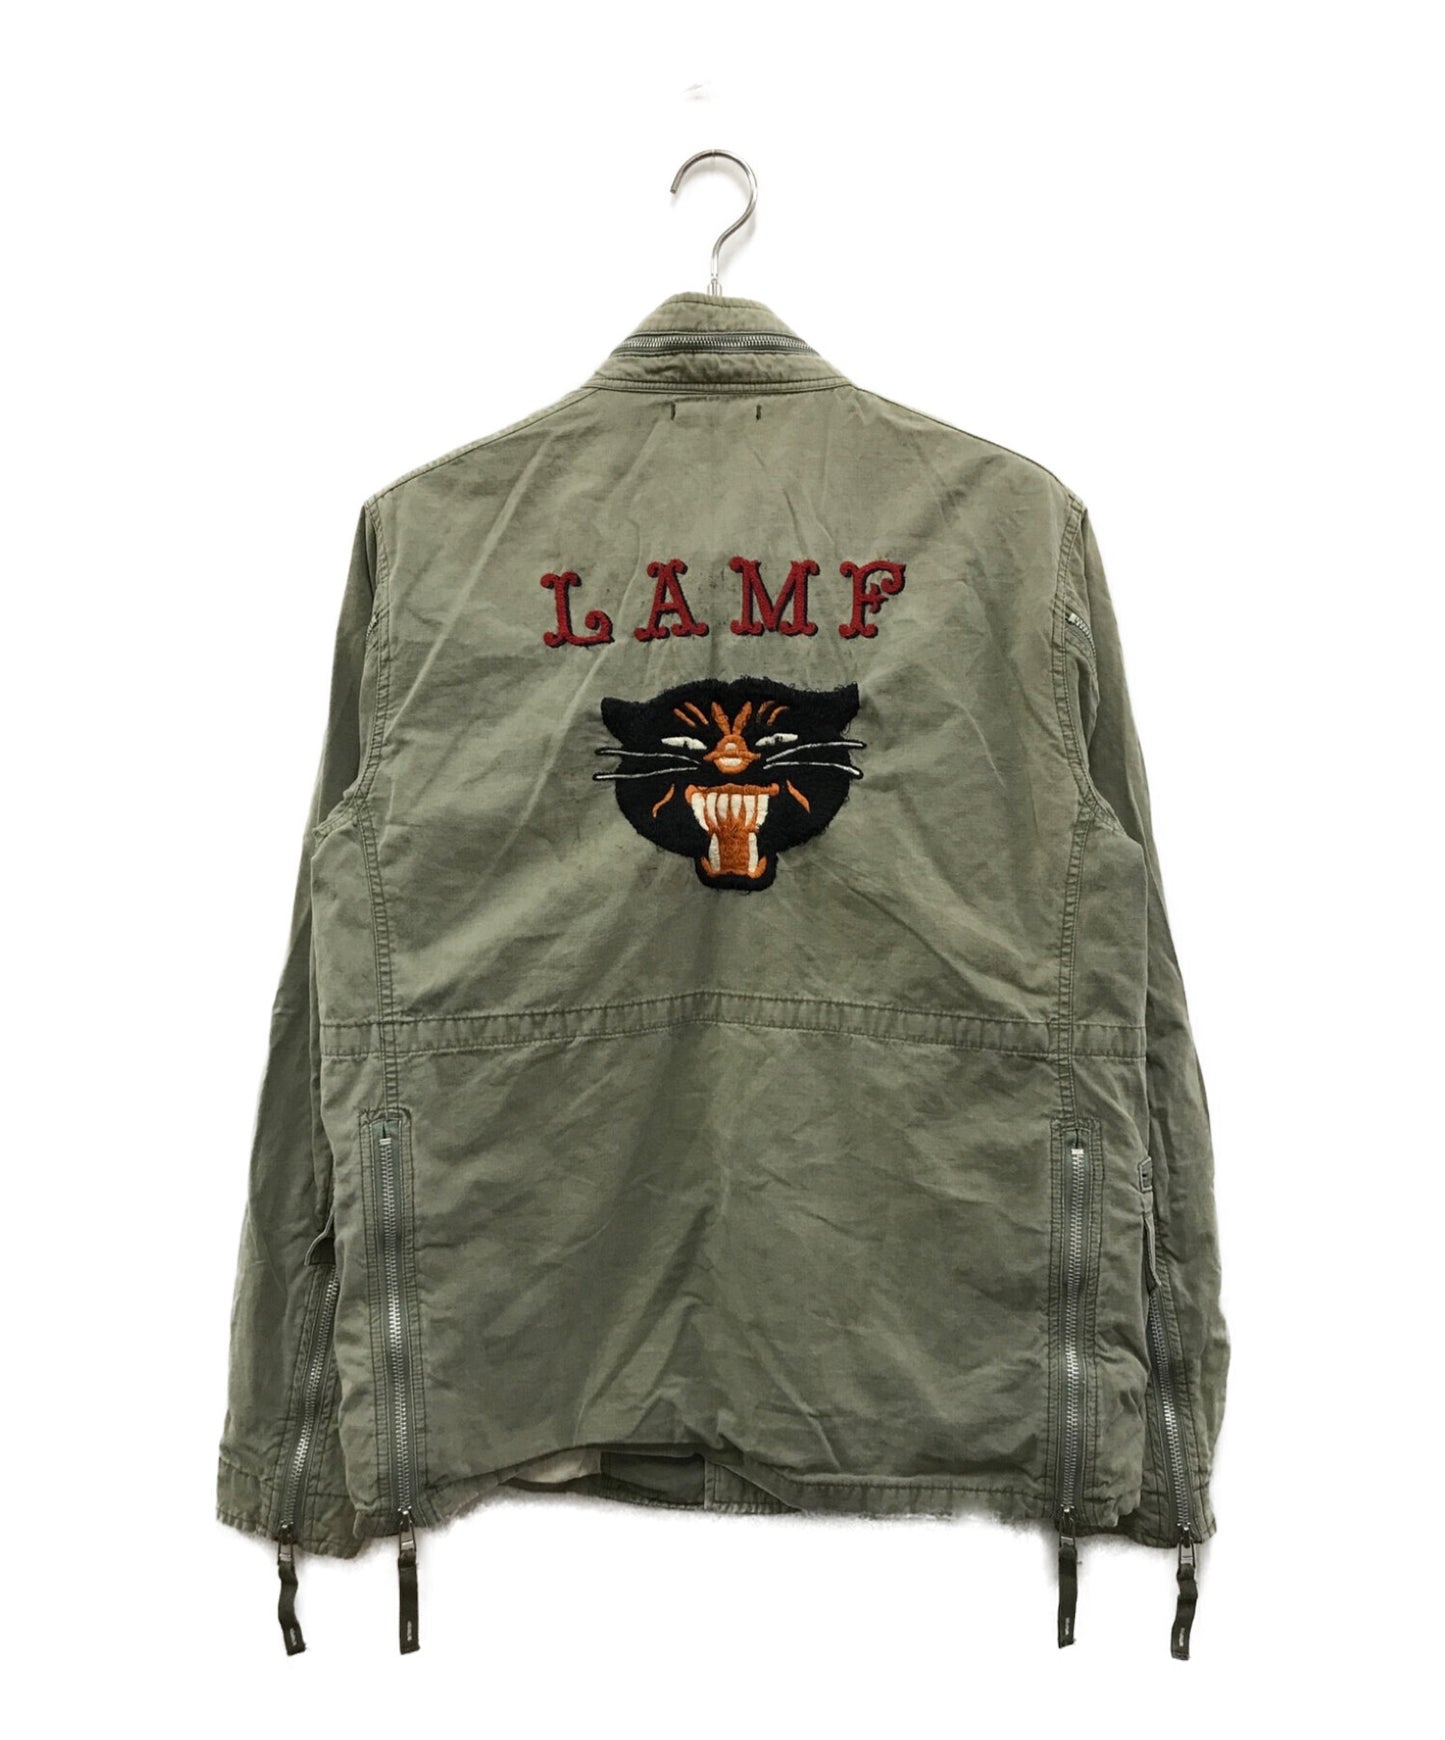 WTAPS M-65 Military Jacket 2009/1st 091GWDT-JKM04 | Archive Factory